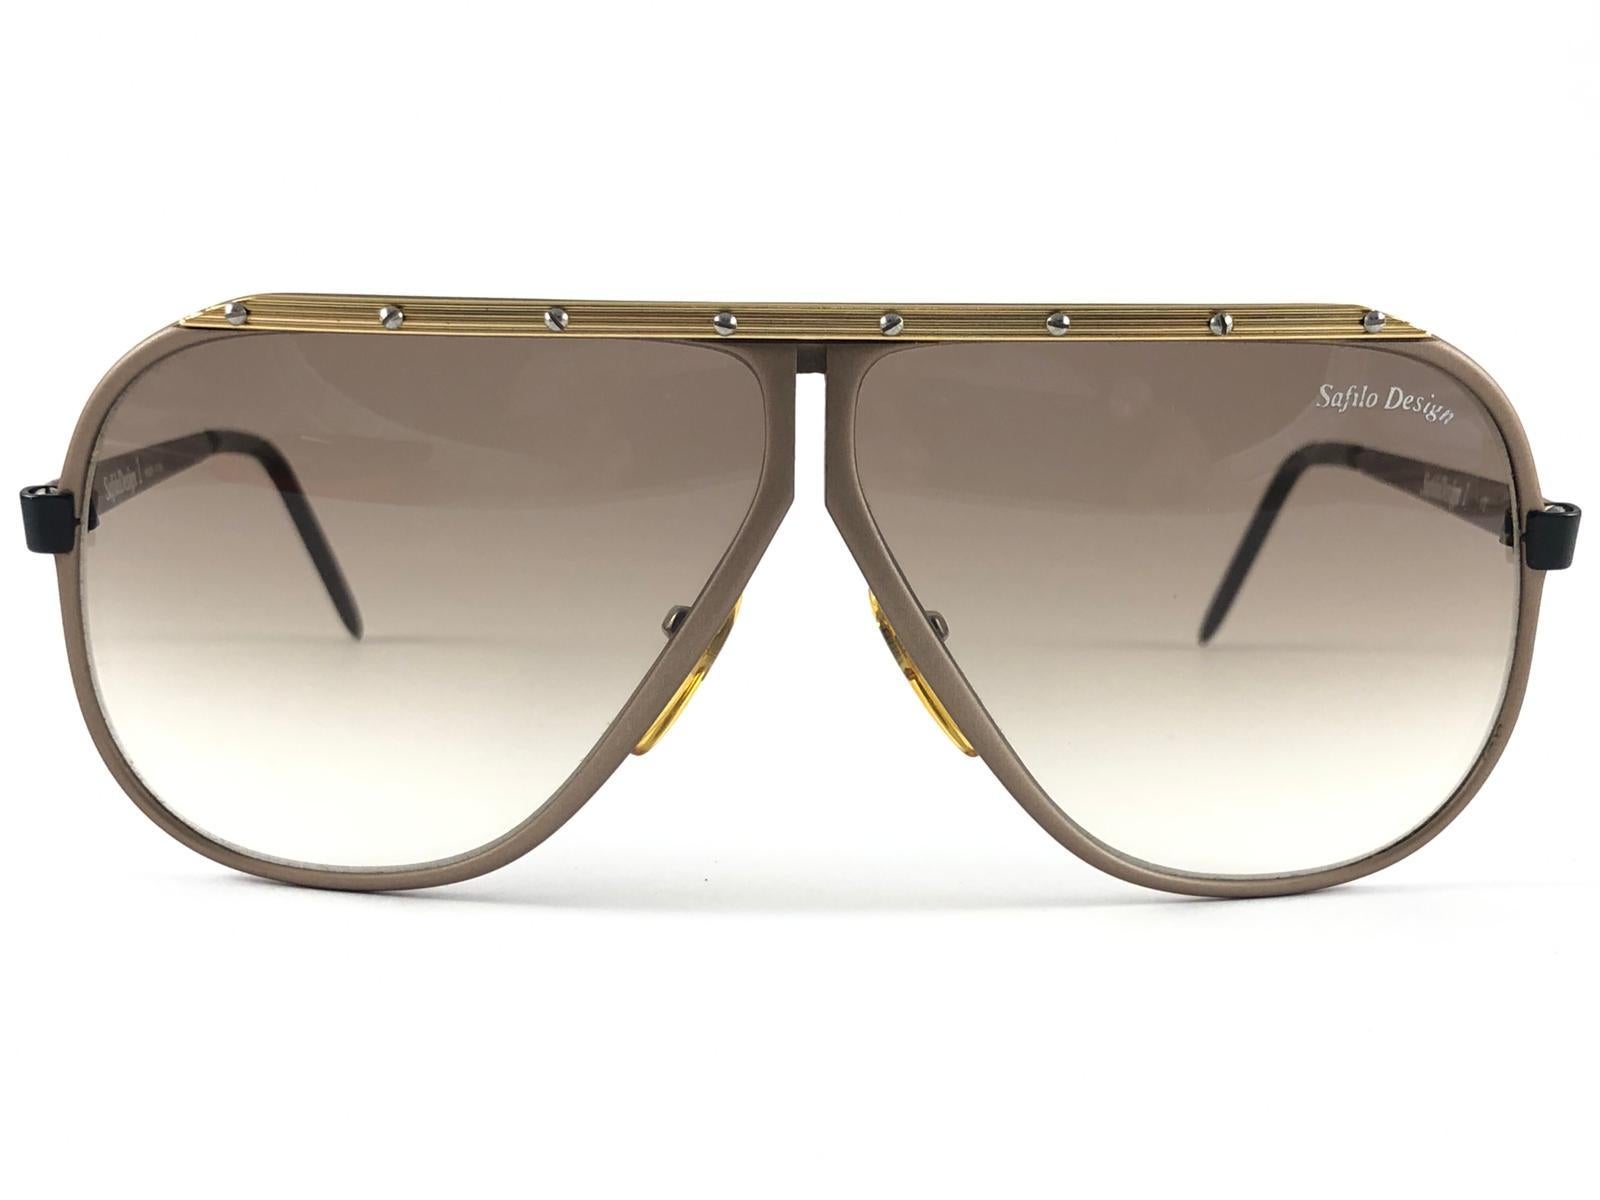 New Vintage Safilo, a balanced combination of Italian craftsmanship, design, functionality and striking aesthetics, this model showcases a Copper mate with Gold accents Aviator Frame holding Brown gradient lenses.

New, never worn or displayed.
Made